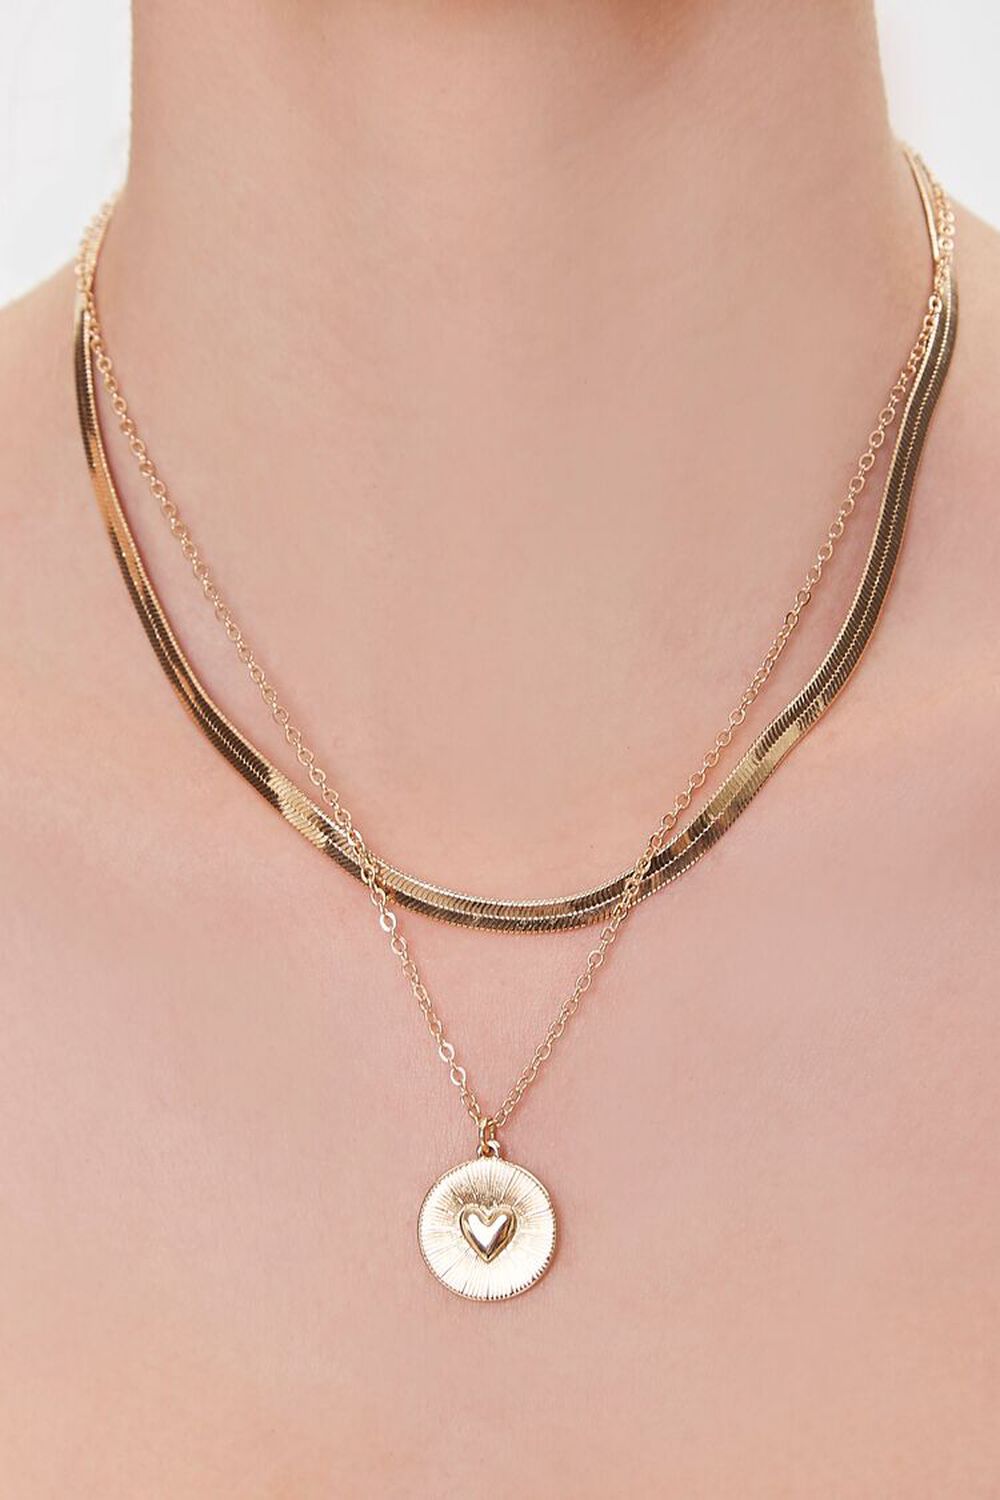 GOLD Heart Pendant Layered Necklace, image 1